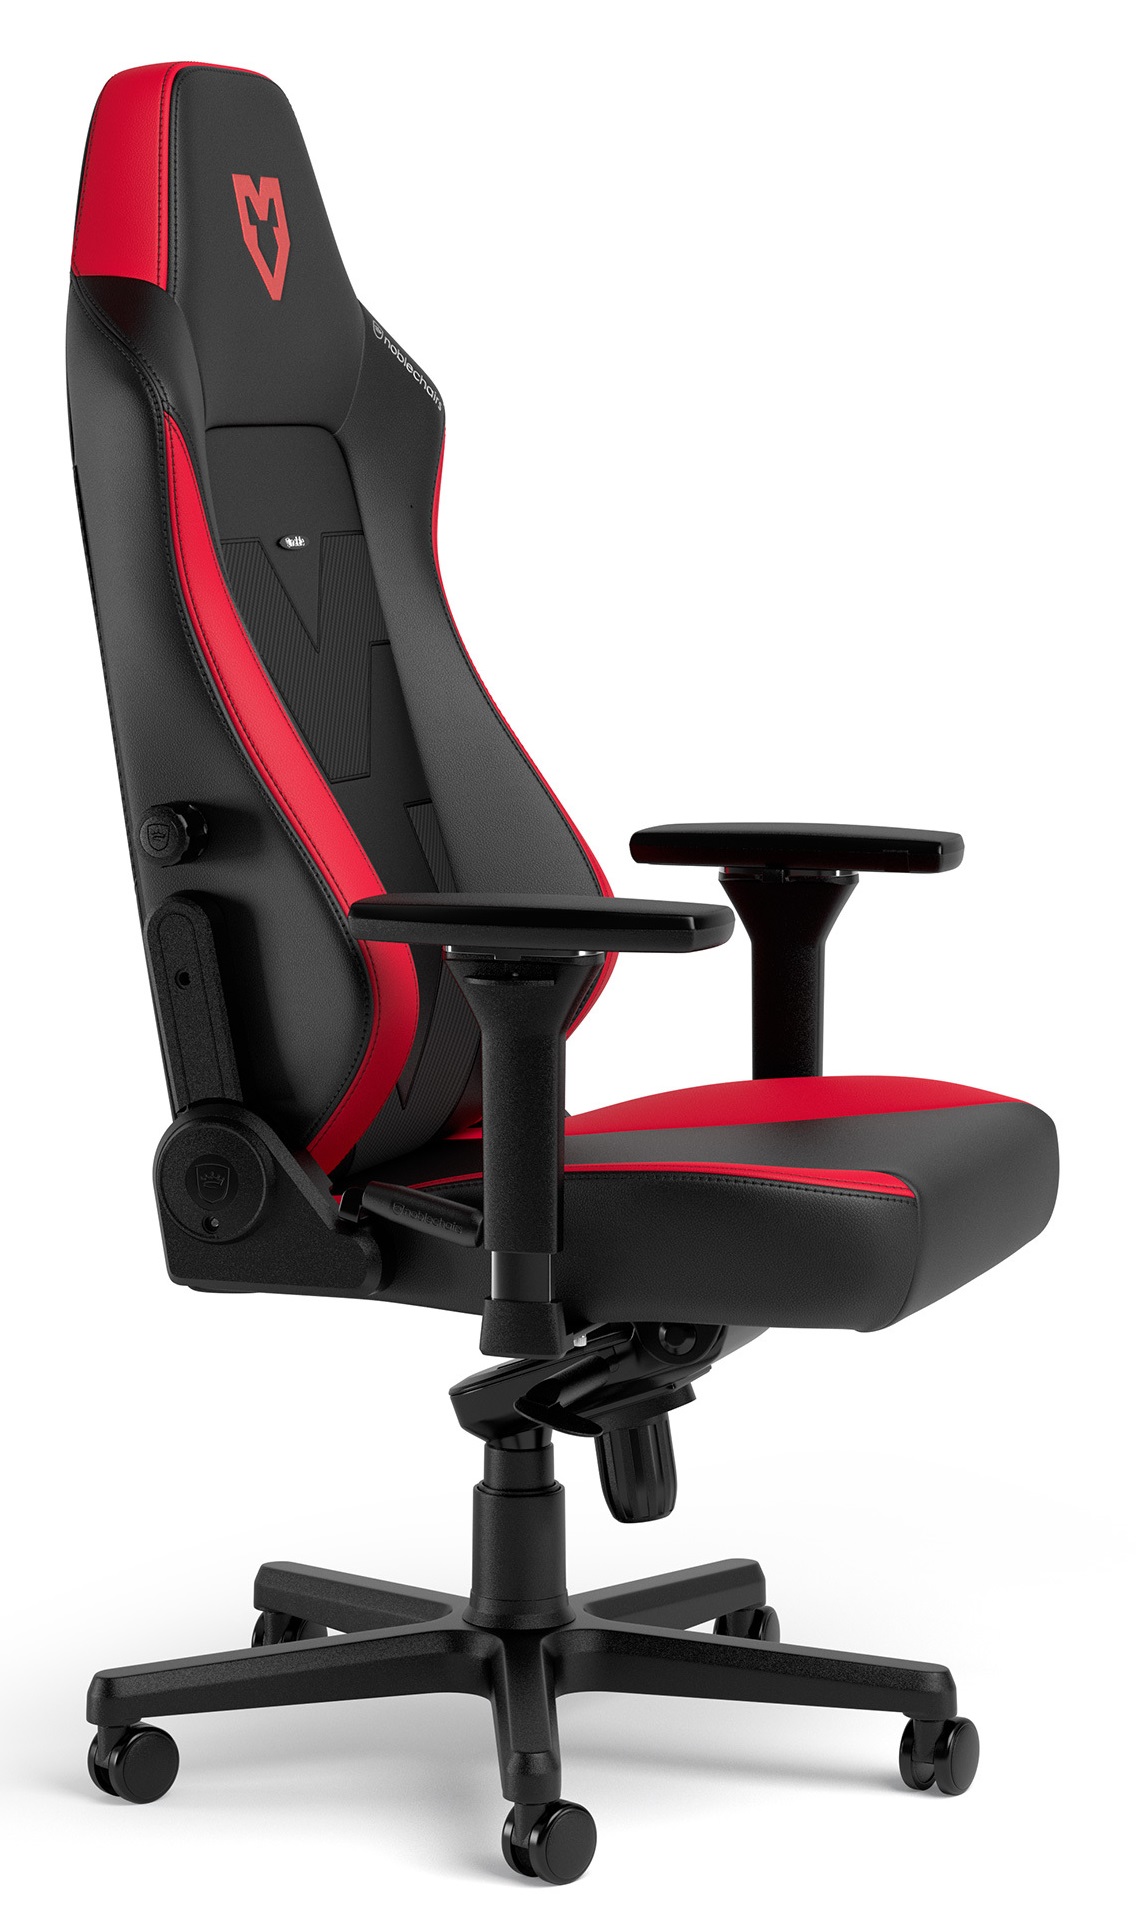 noblechairs - noblechairs HERO Gaming Chair MOUZ Esports Edition - Black/Red